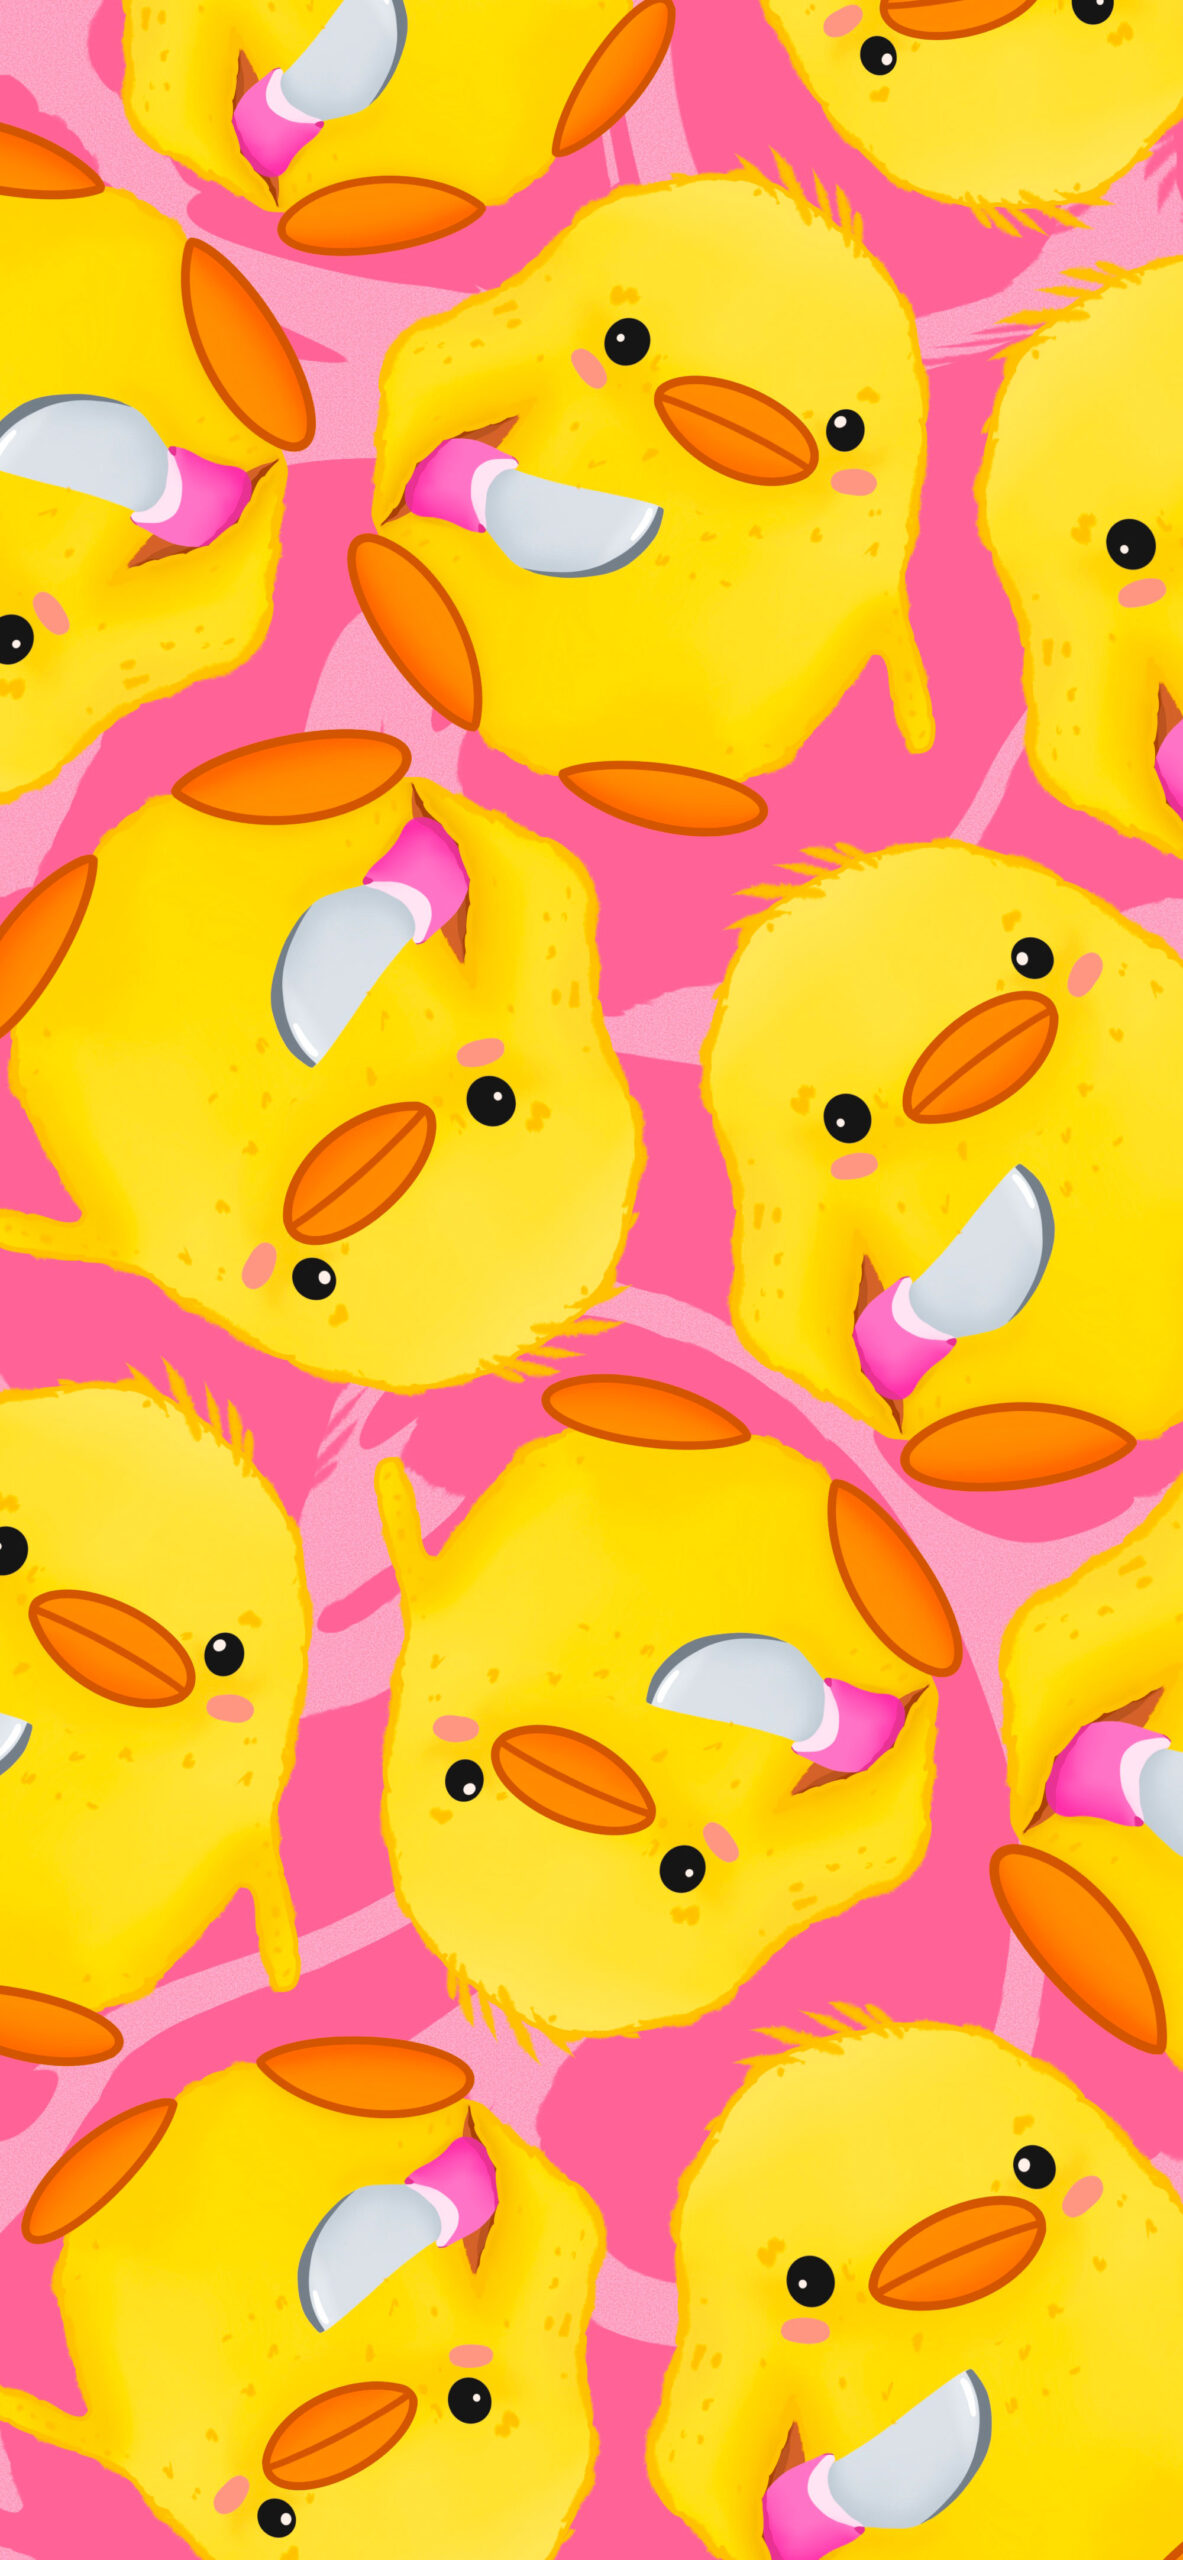 duck with knife meme pink wallpaper